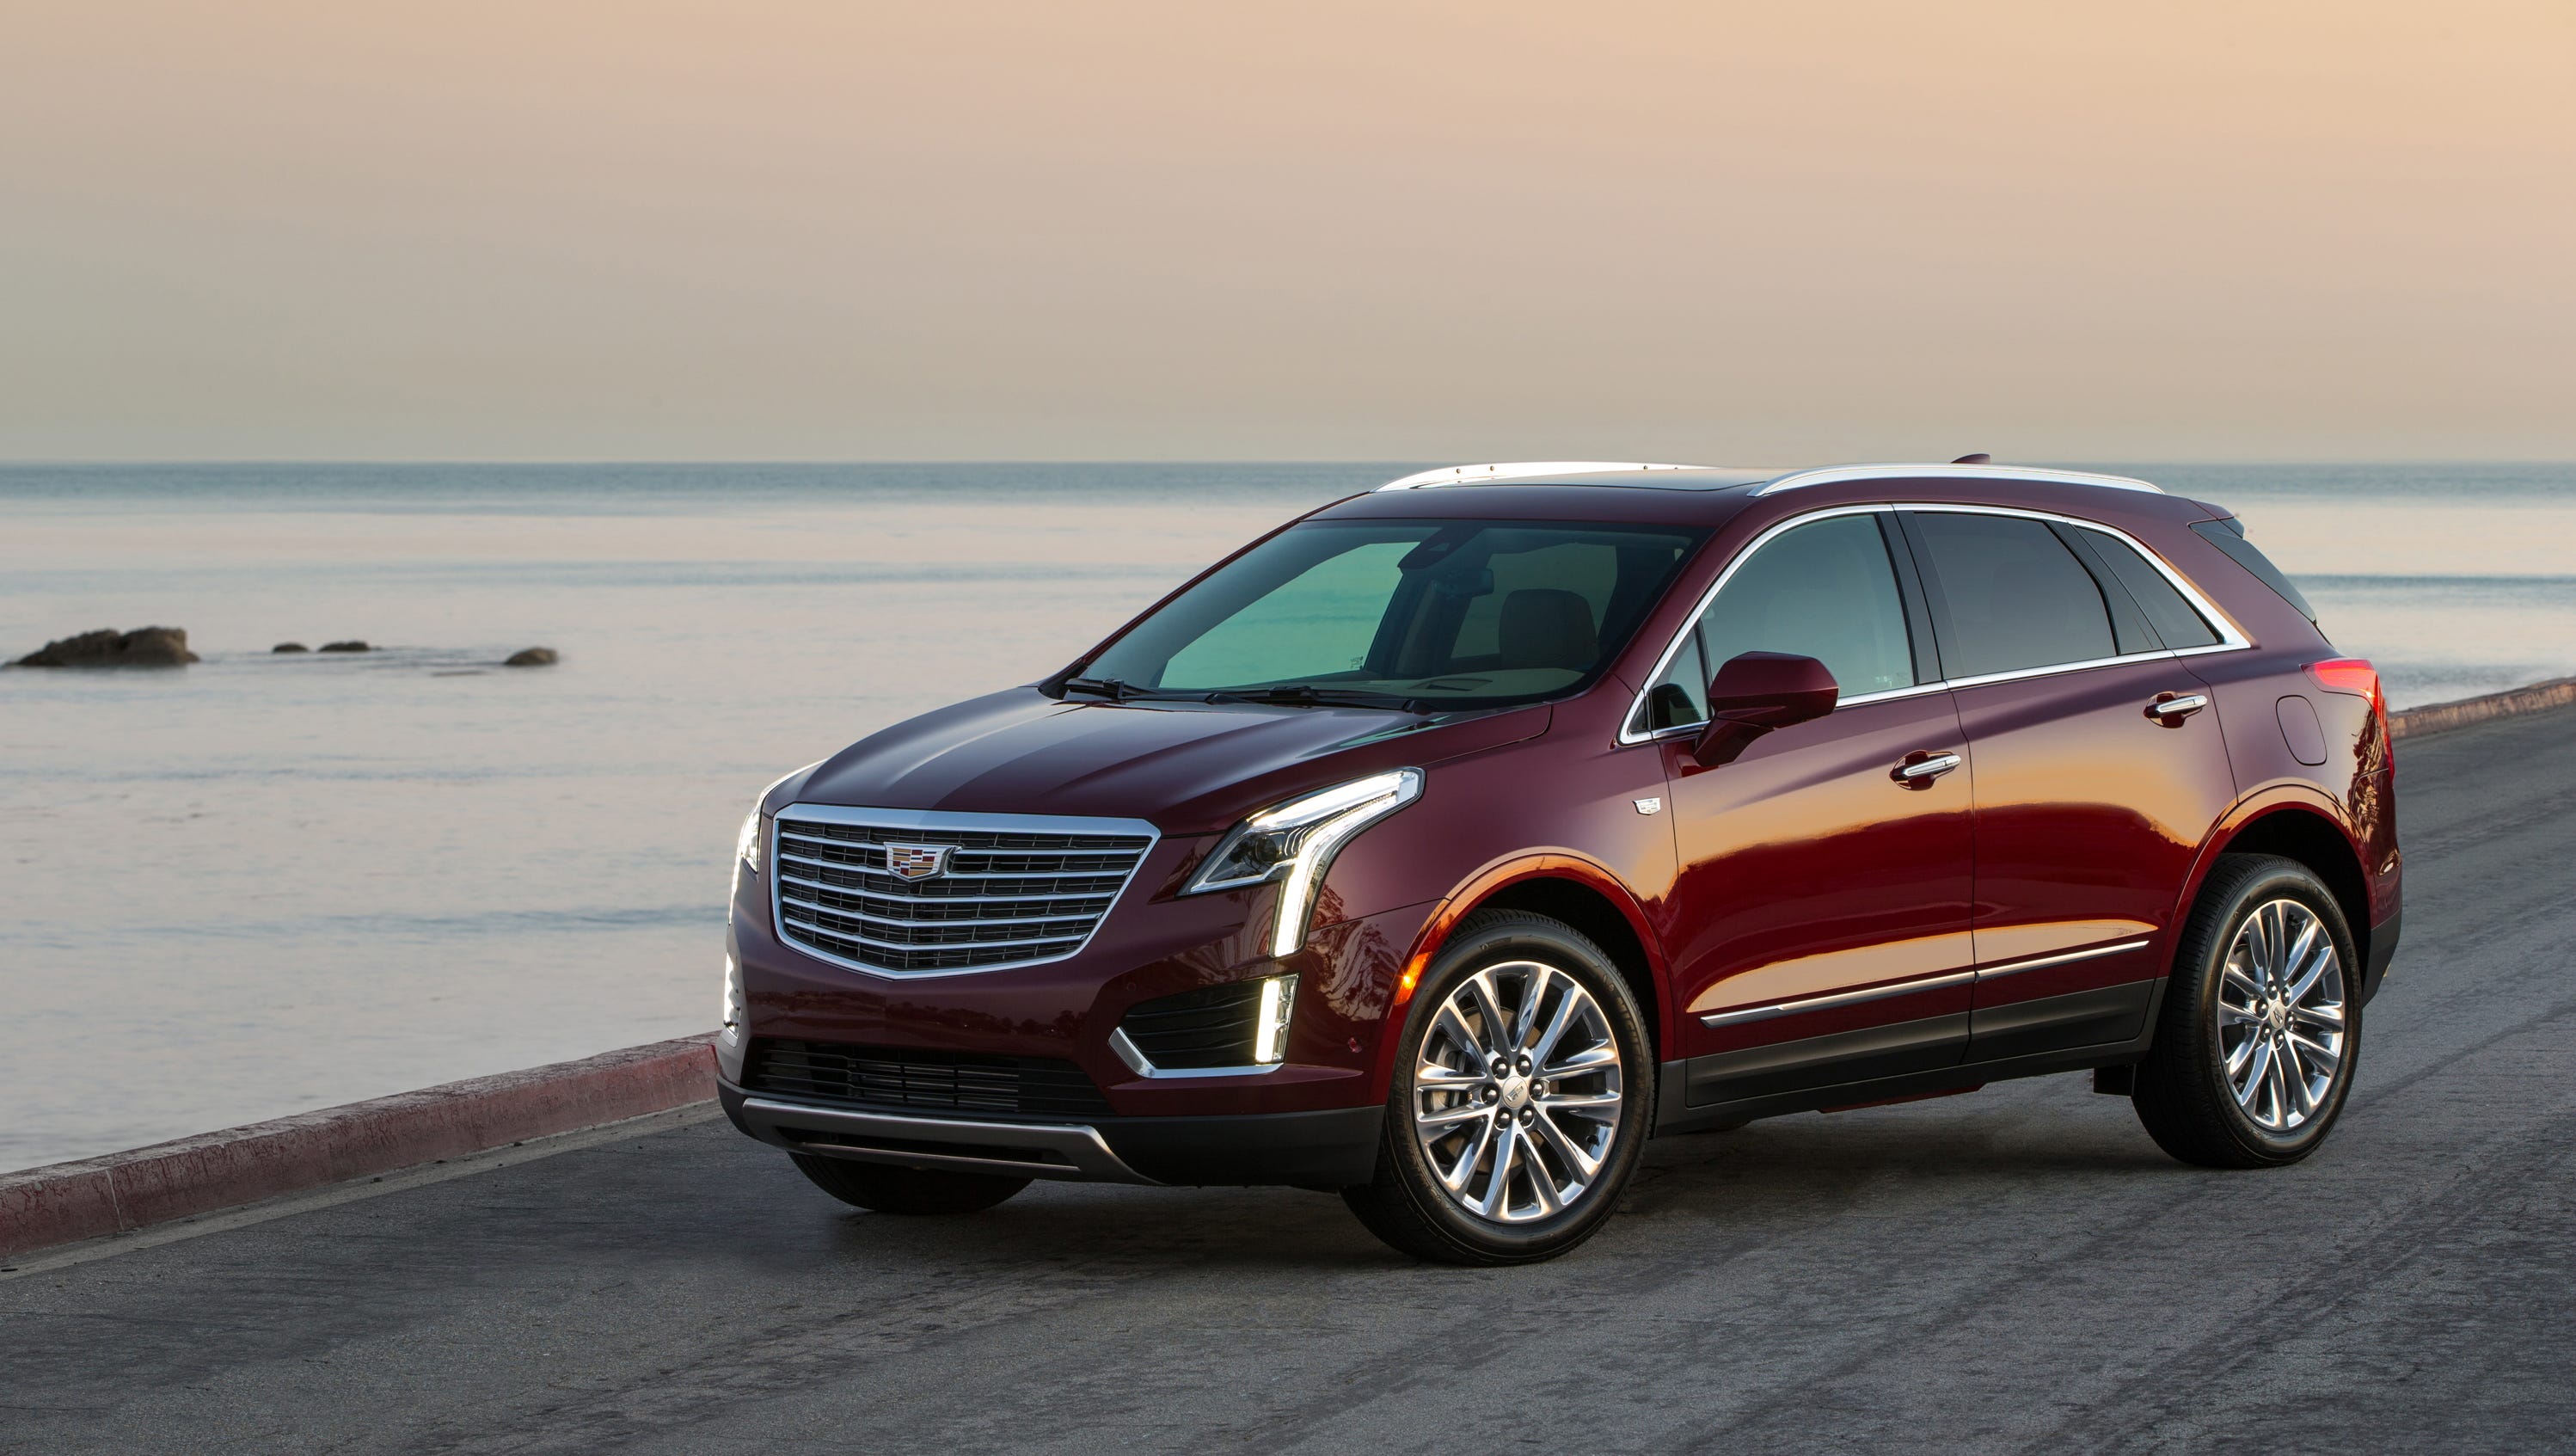 What Incentives Is Cadillac Offering